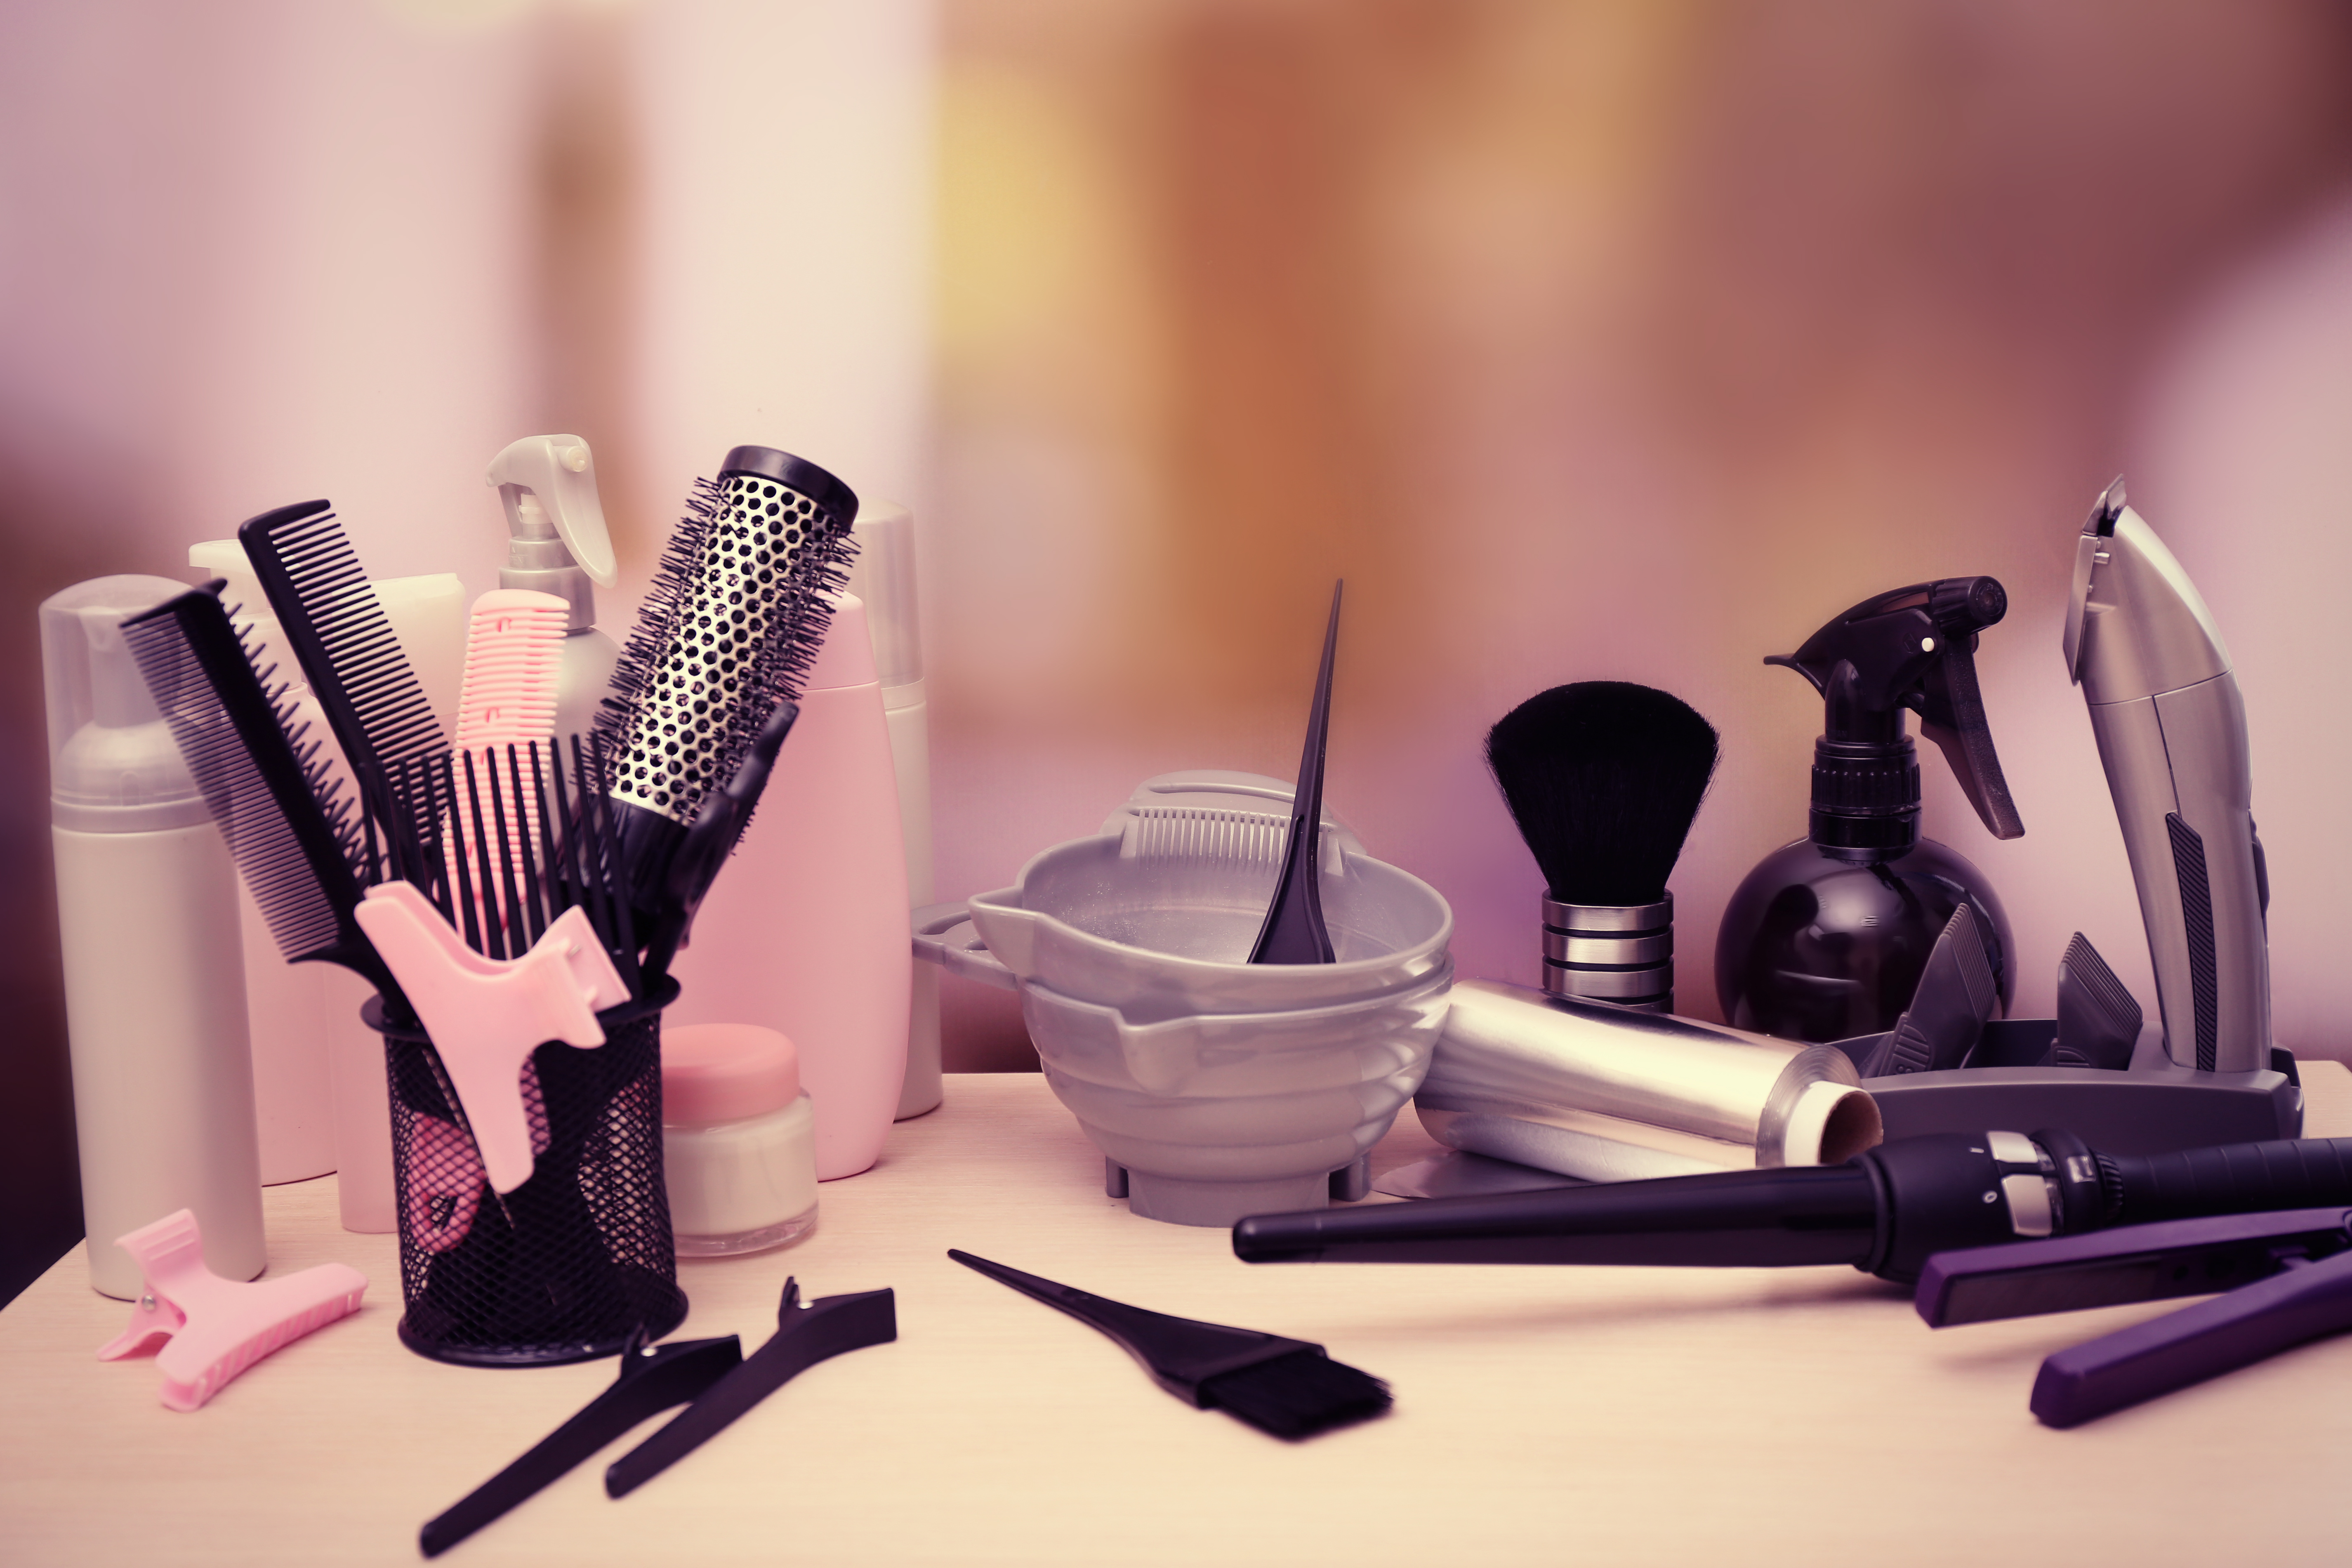 Common Hair Dye Supplies That Every Salon and Stylist Should Have